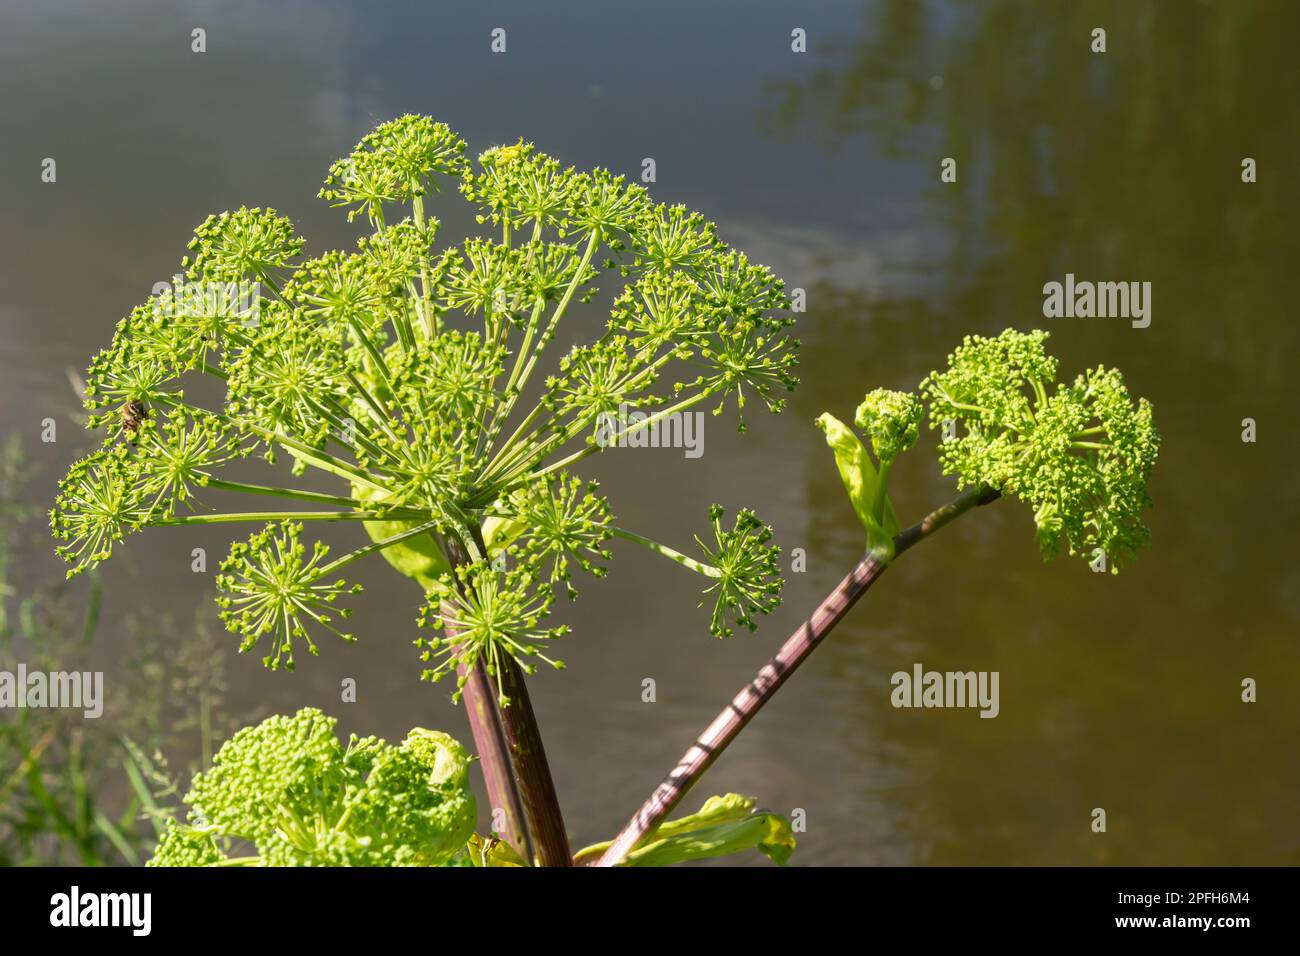 Medicinal, essential oil, honey, food plant - angelica archangelica grows in the wild. Stock Photo